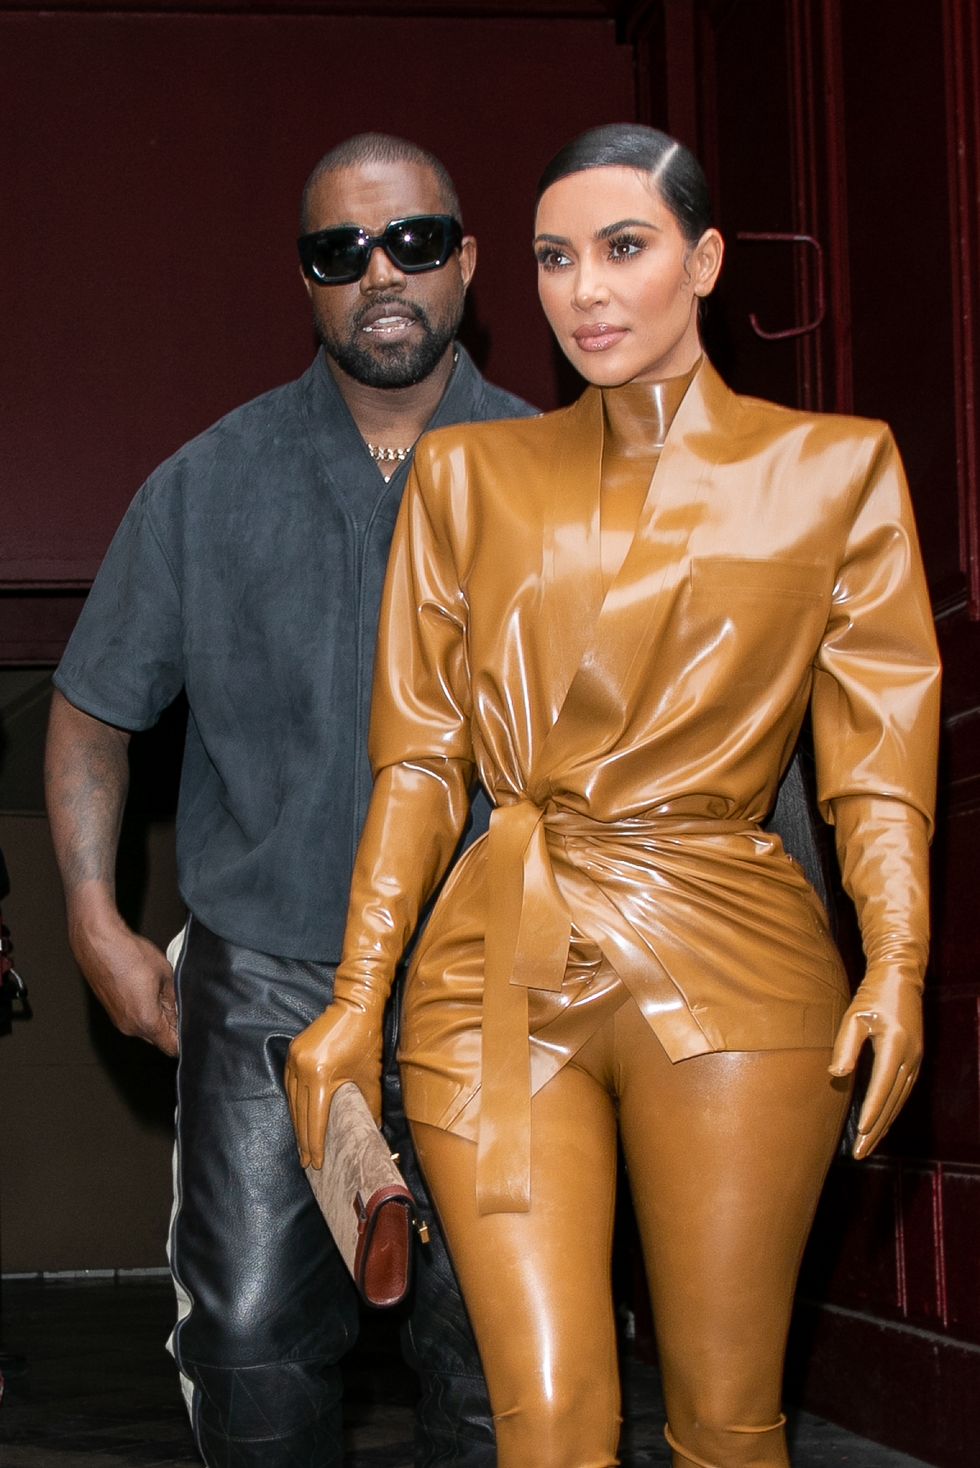 Kanye West Reportedly Bought a House Across From Kim Kardashian In Part to ‘Win Her Back’